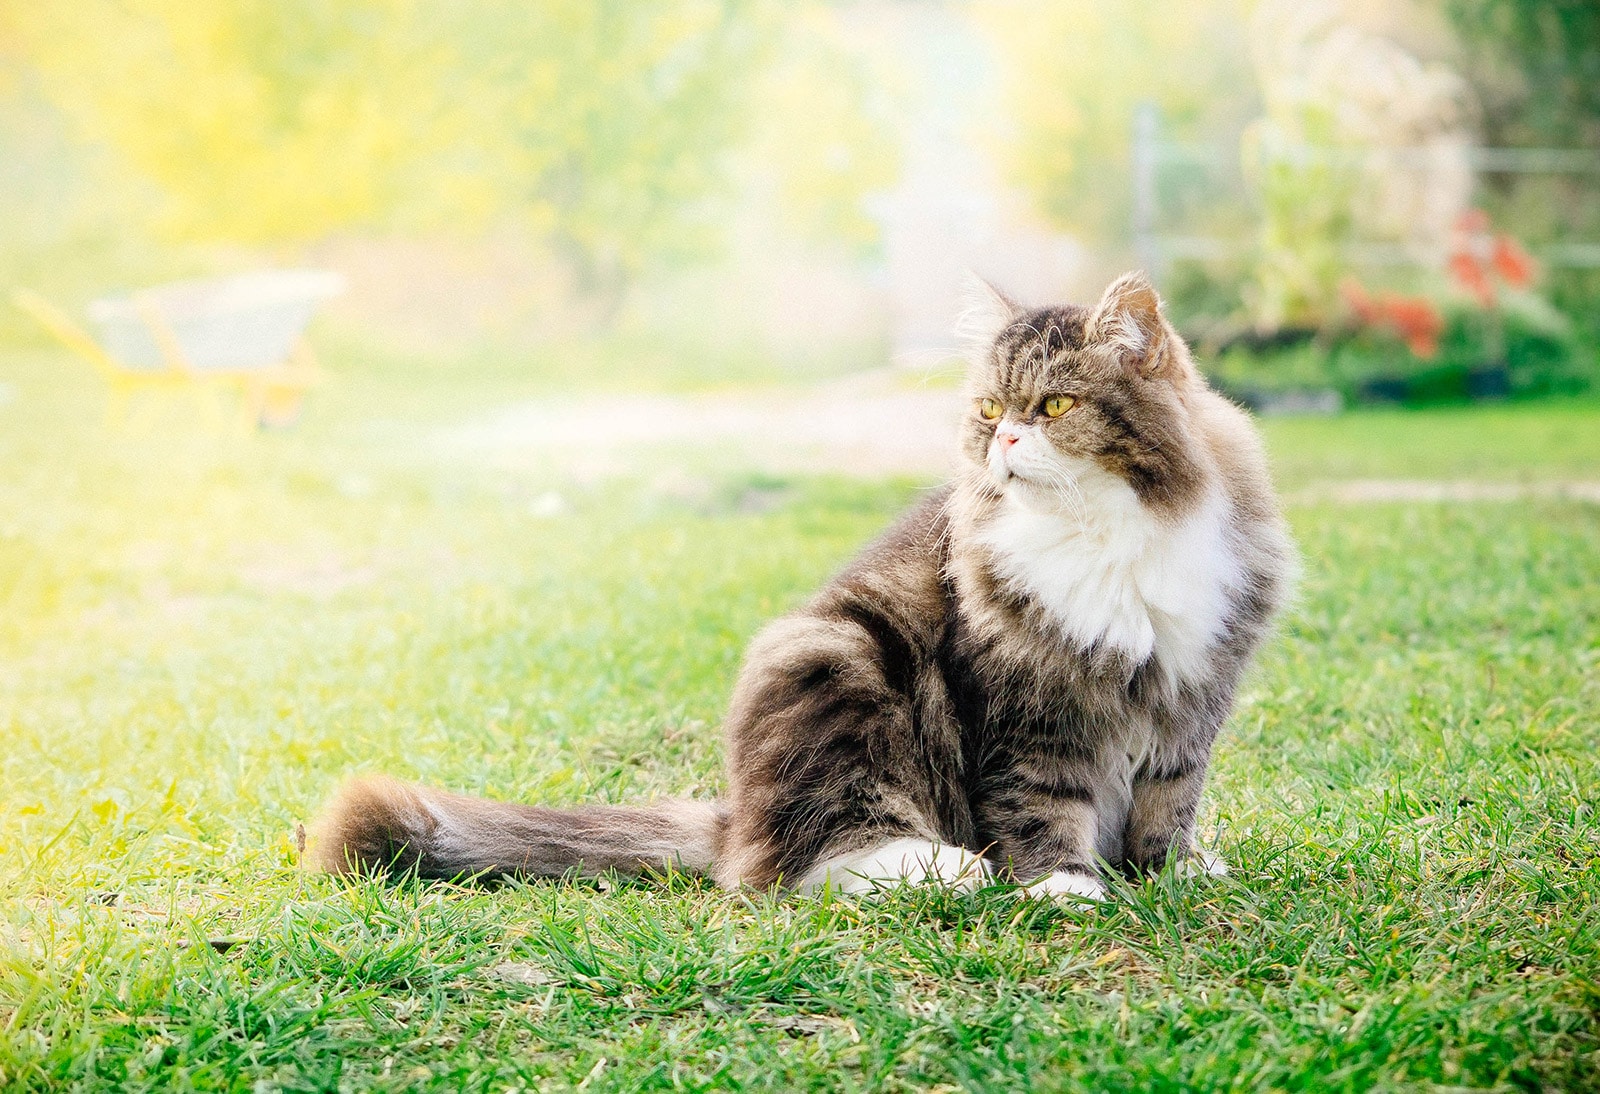 Fluffy gray and white cat sitting on a lawn